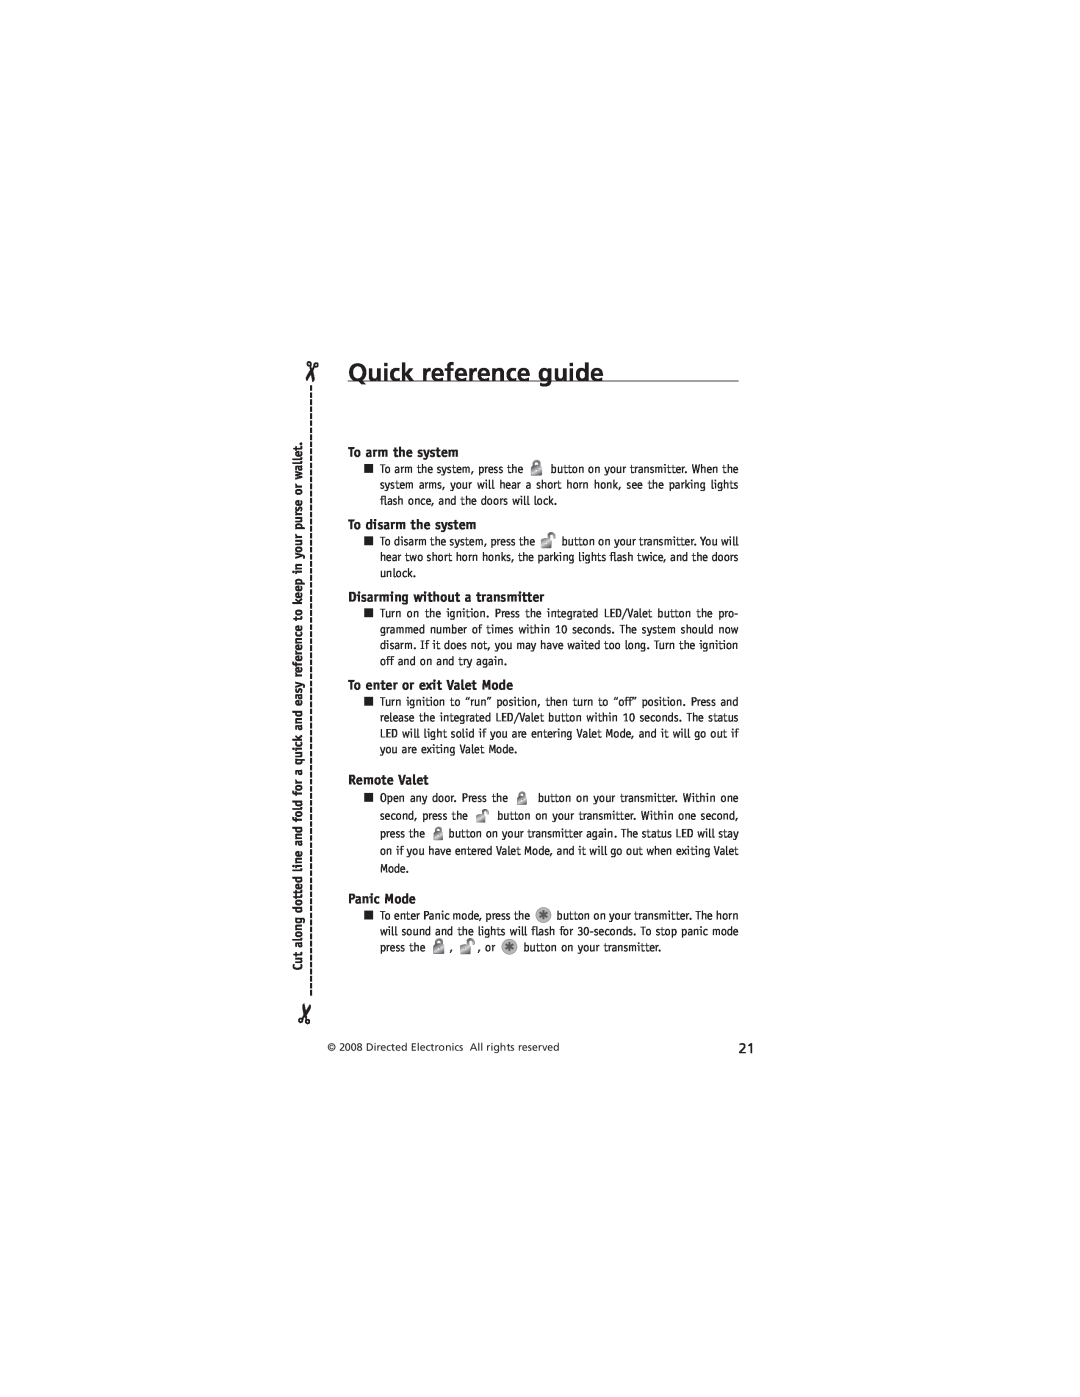 Directed Electronics AM5 Quick reference guide, To arm the system, To disarm the system, Disarming without a transmitter 